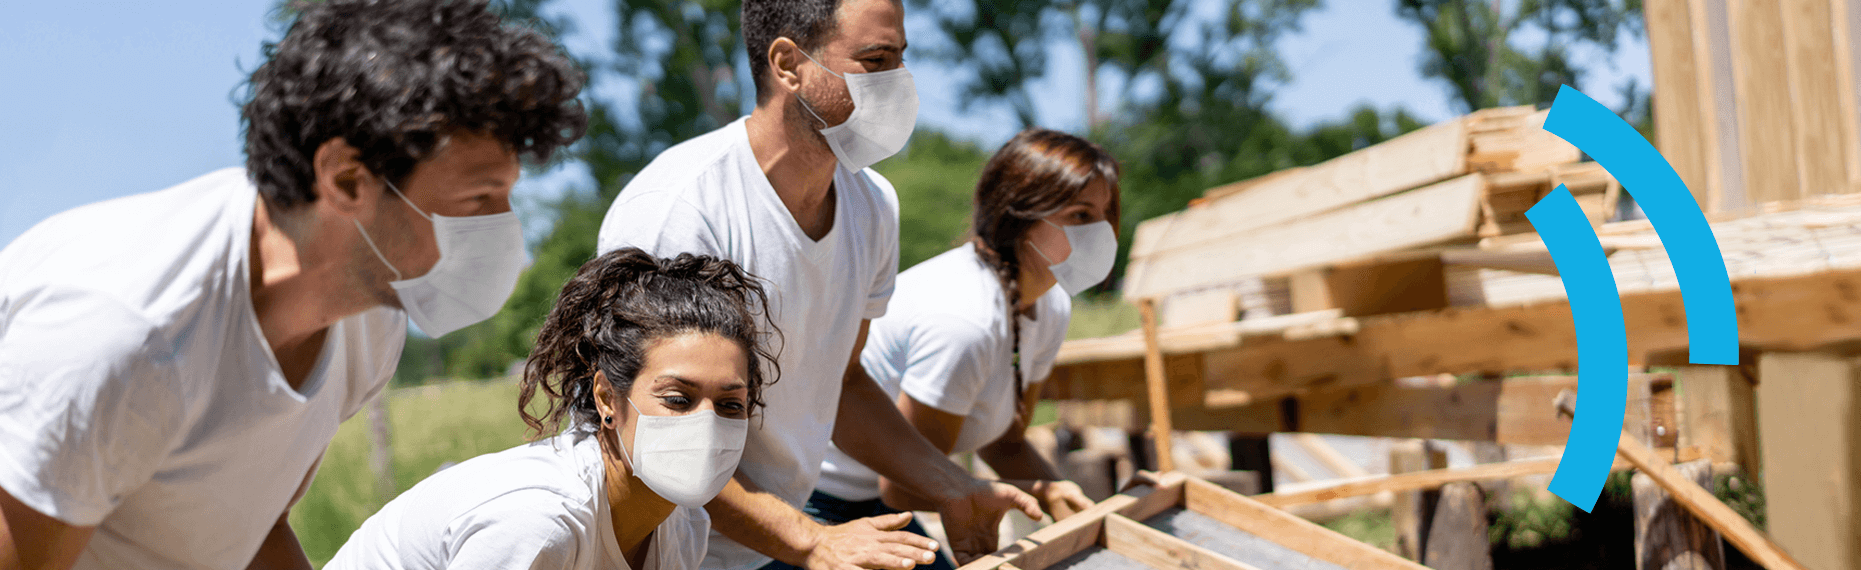 A group of 4 European Solidarity Corps volunteers wearing face masks working together to build something